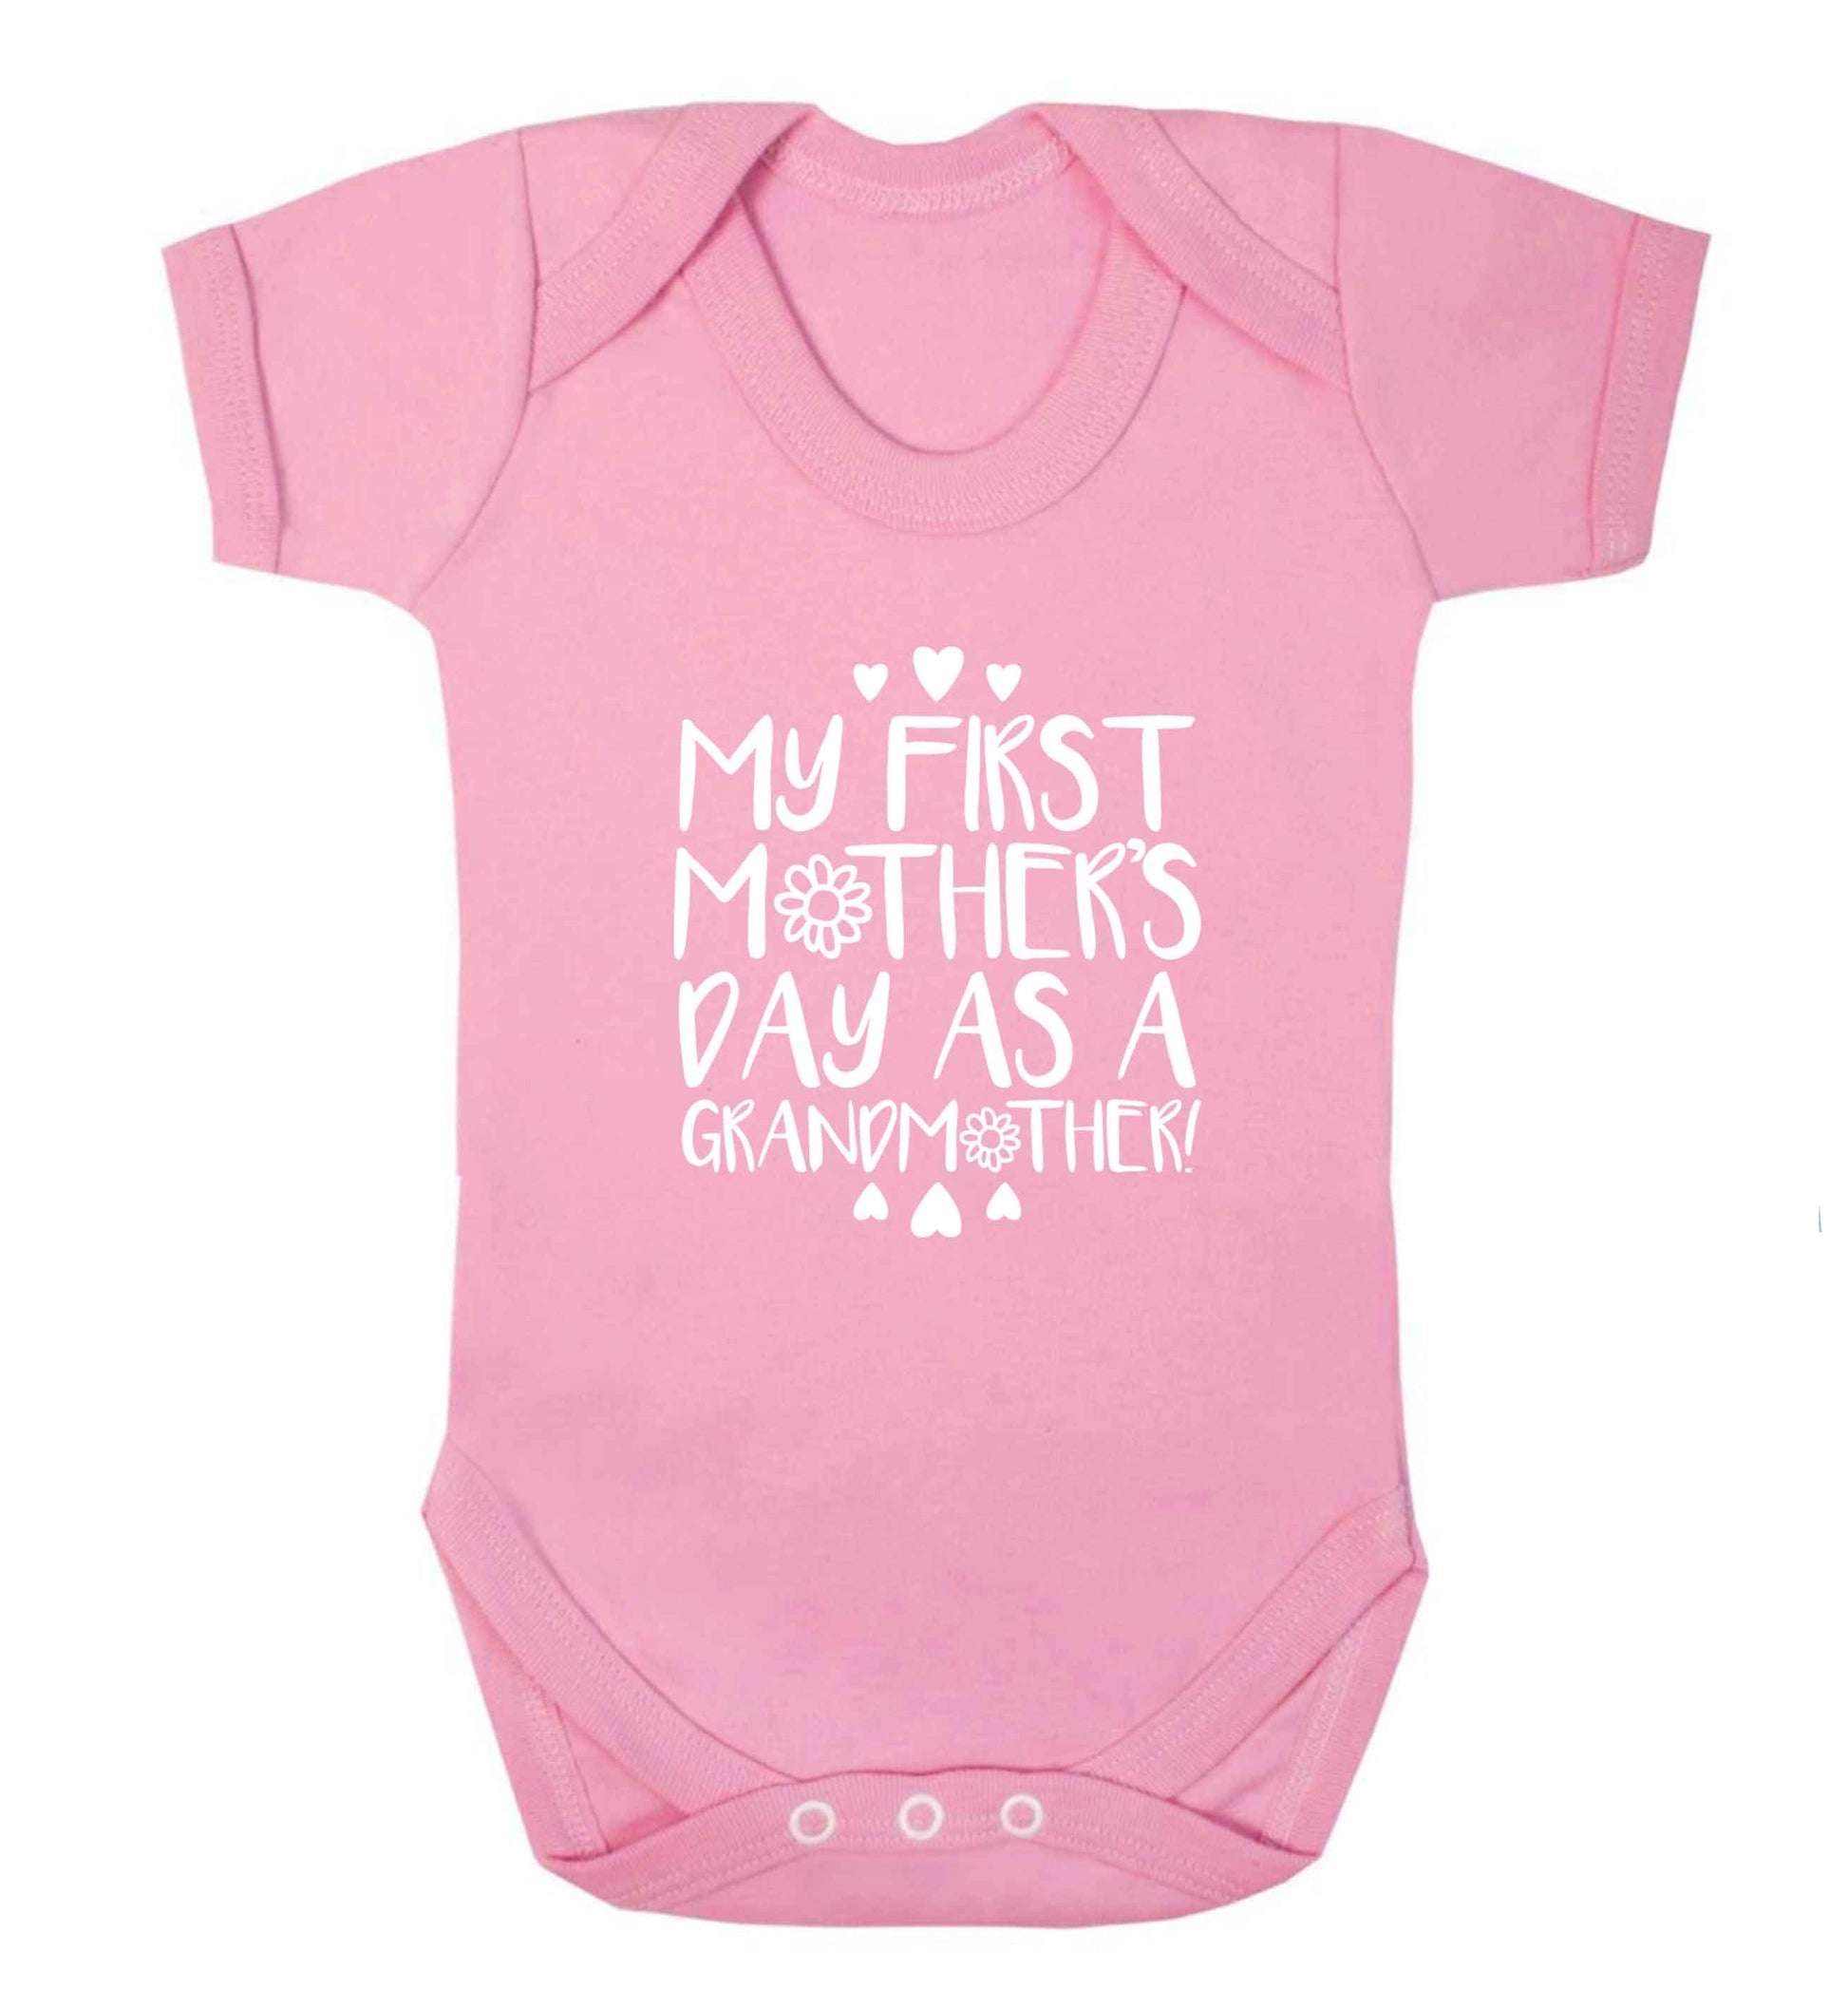 It's my first mother's day as a grandmother baby vest pale pink 18-24 months